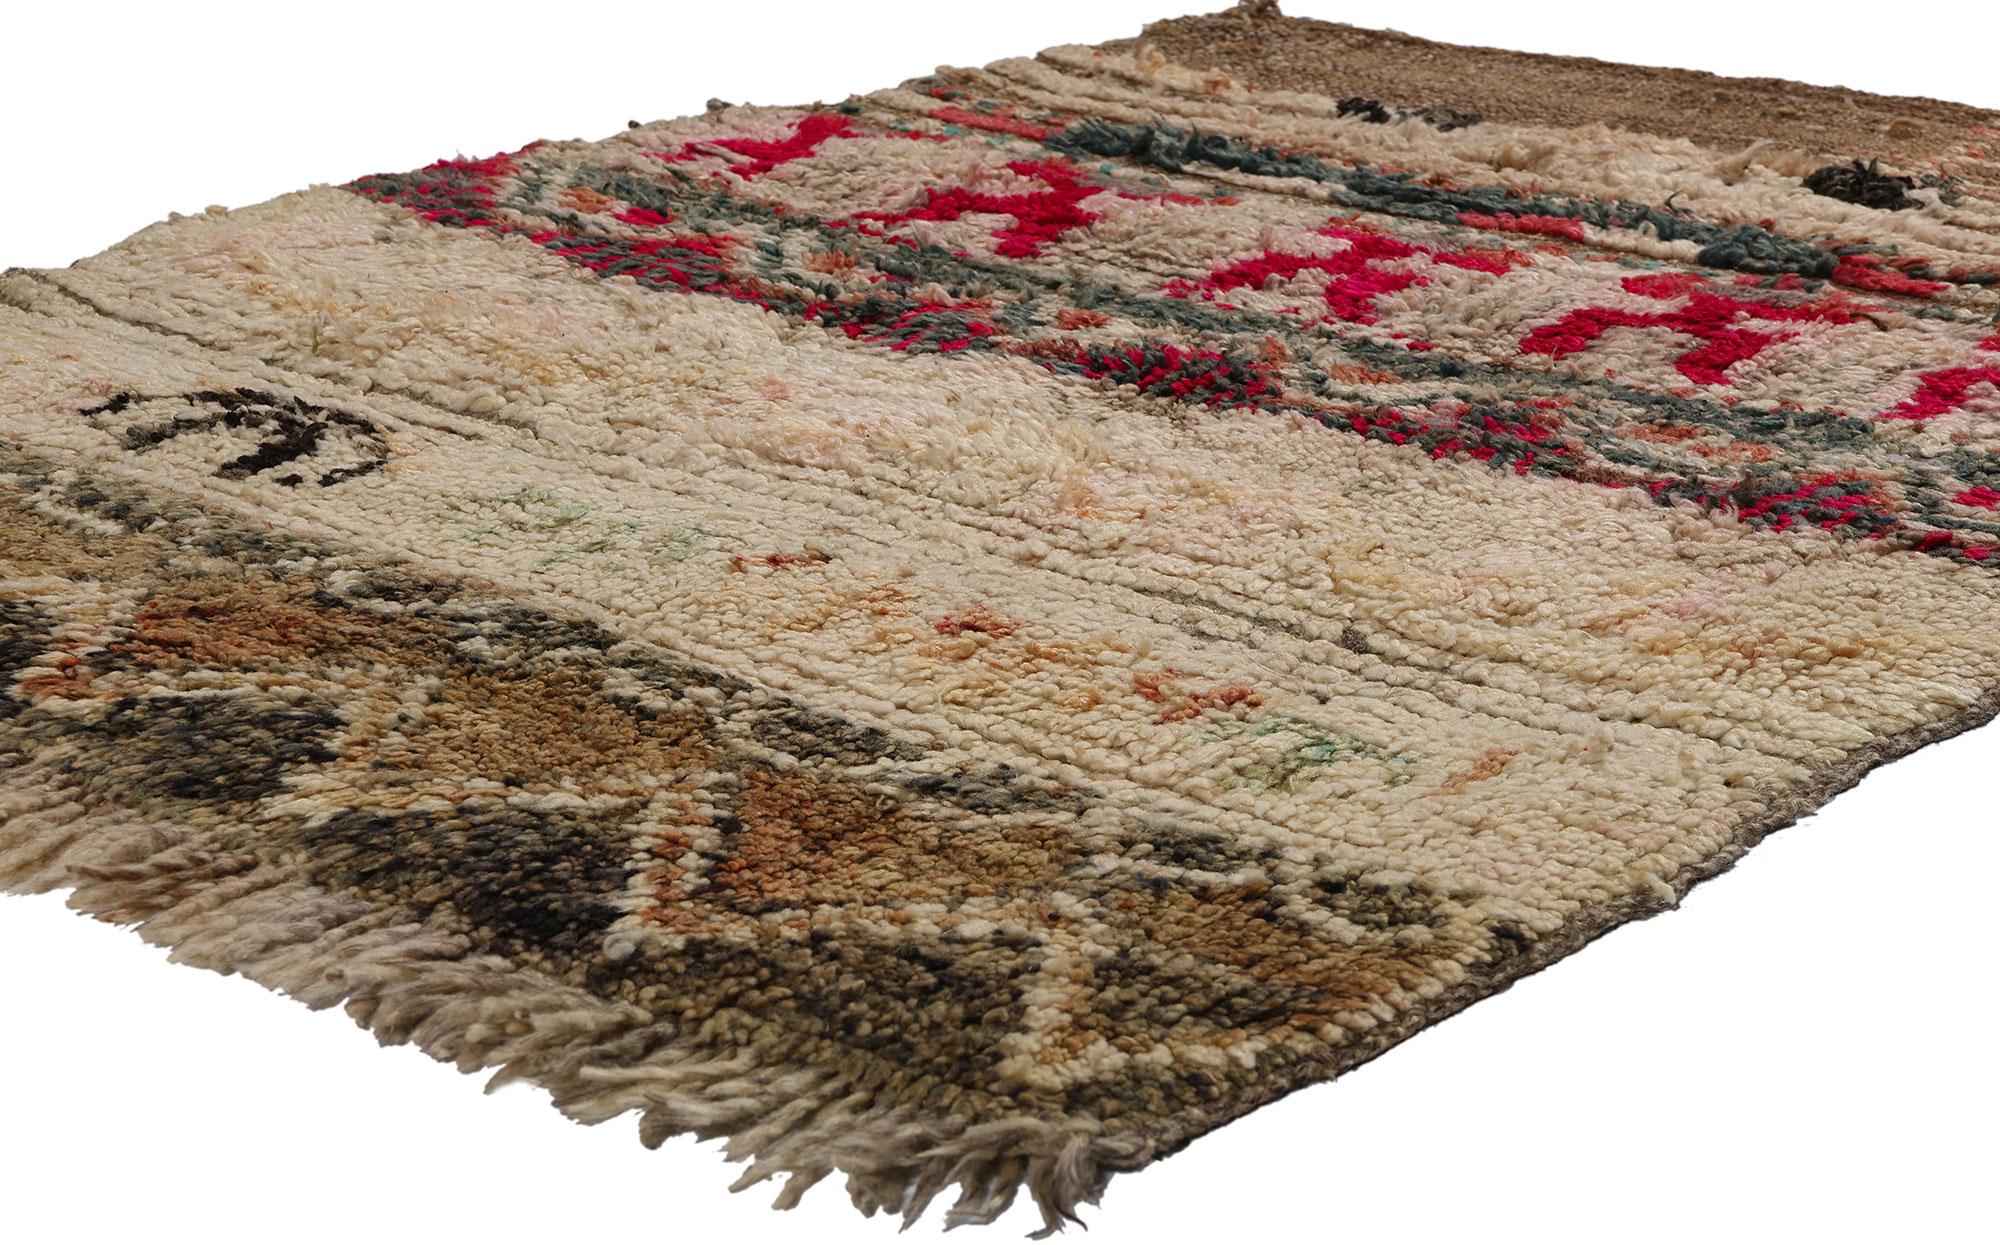 21833 Vintage Brown Boujad Moroccan Rug, 03'04 x 04'05. Boujad rugs, handwoven masterpieces from Morocco's Boujad region, showcase vibrant designs woven with time-honored traditions by Berber tribes, particularly the Haouz and Rehamna tribes. These